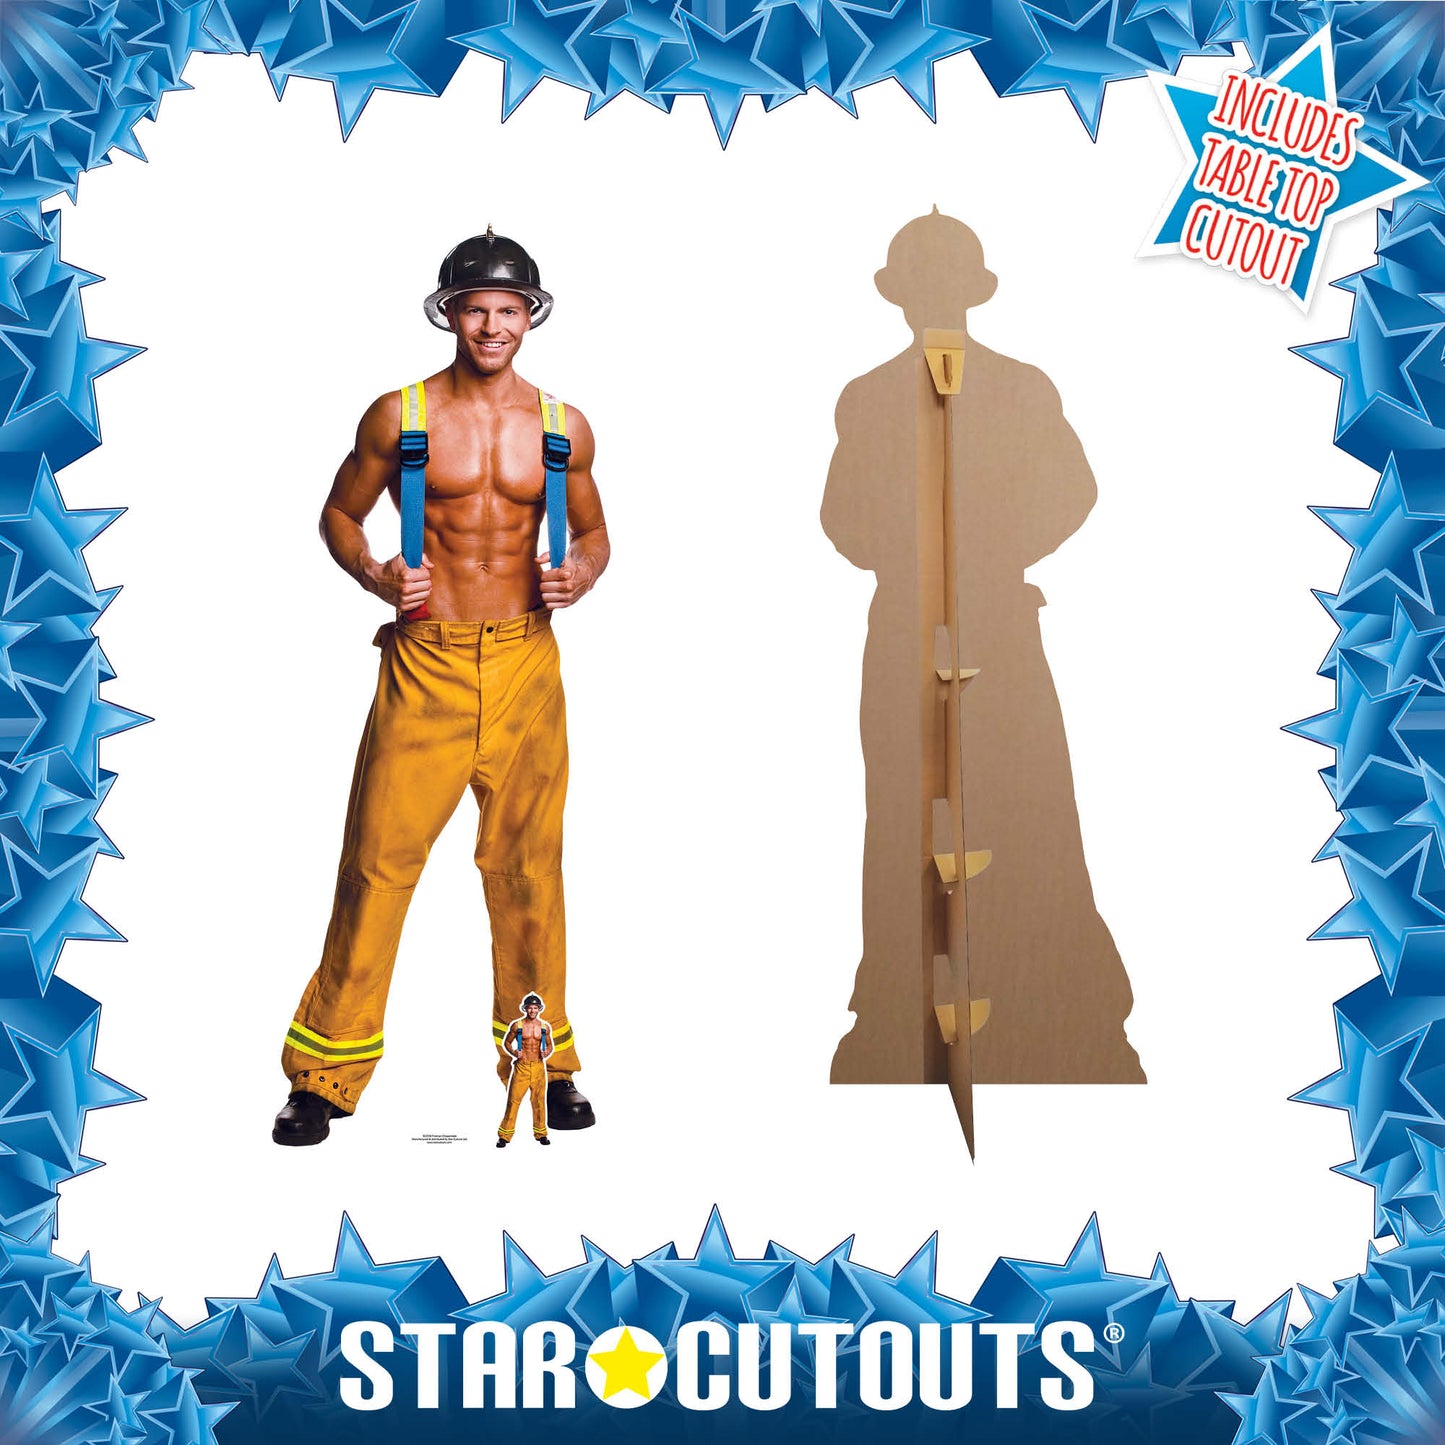 SC2156 Fireman Chippendale Cardboard Cut Out Height 175cm